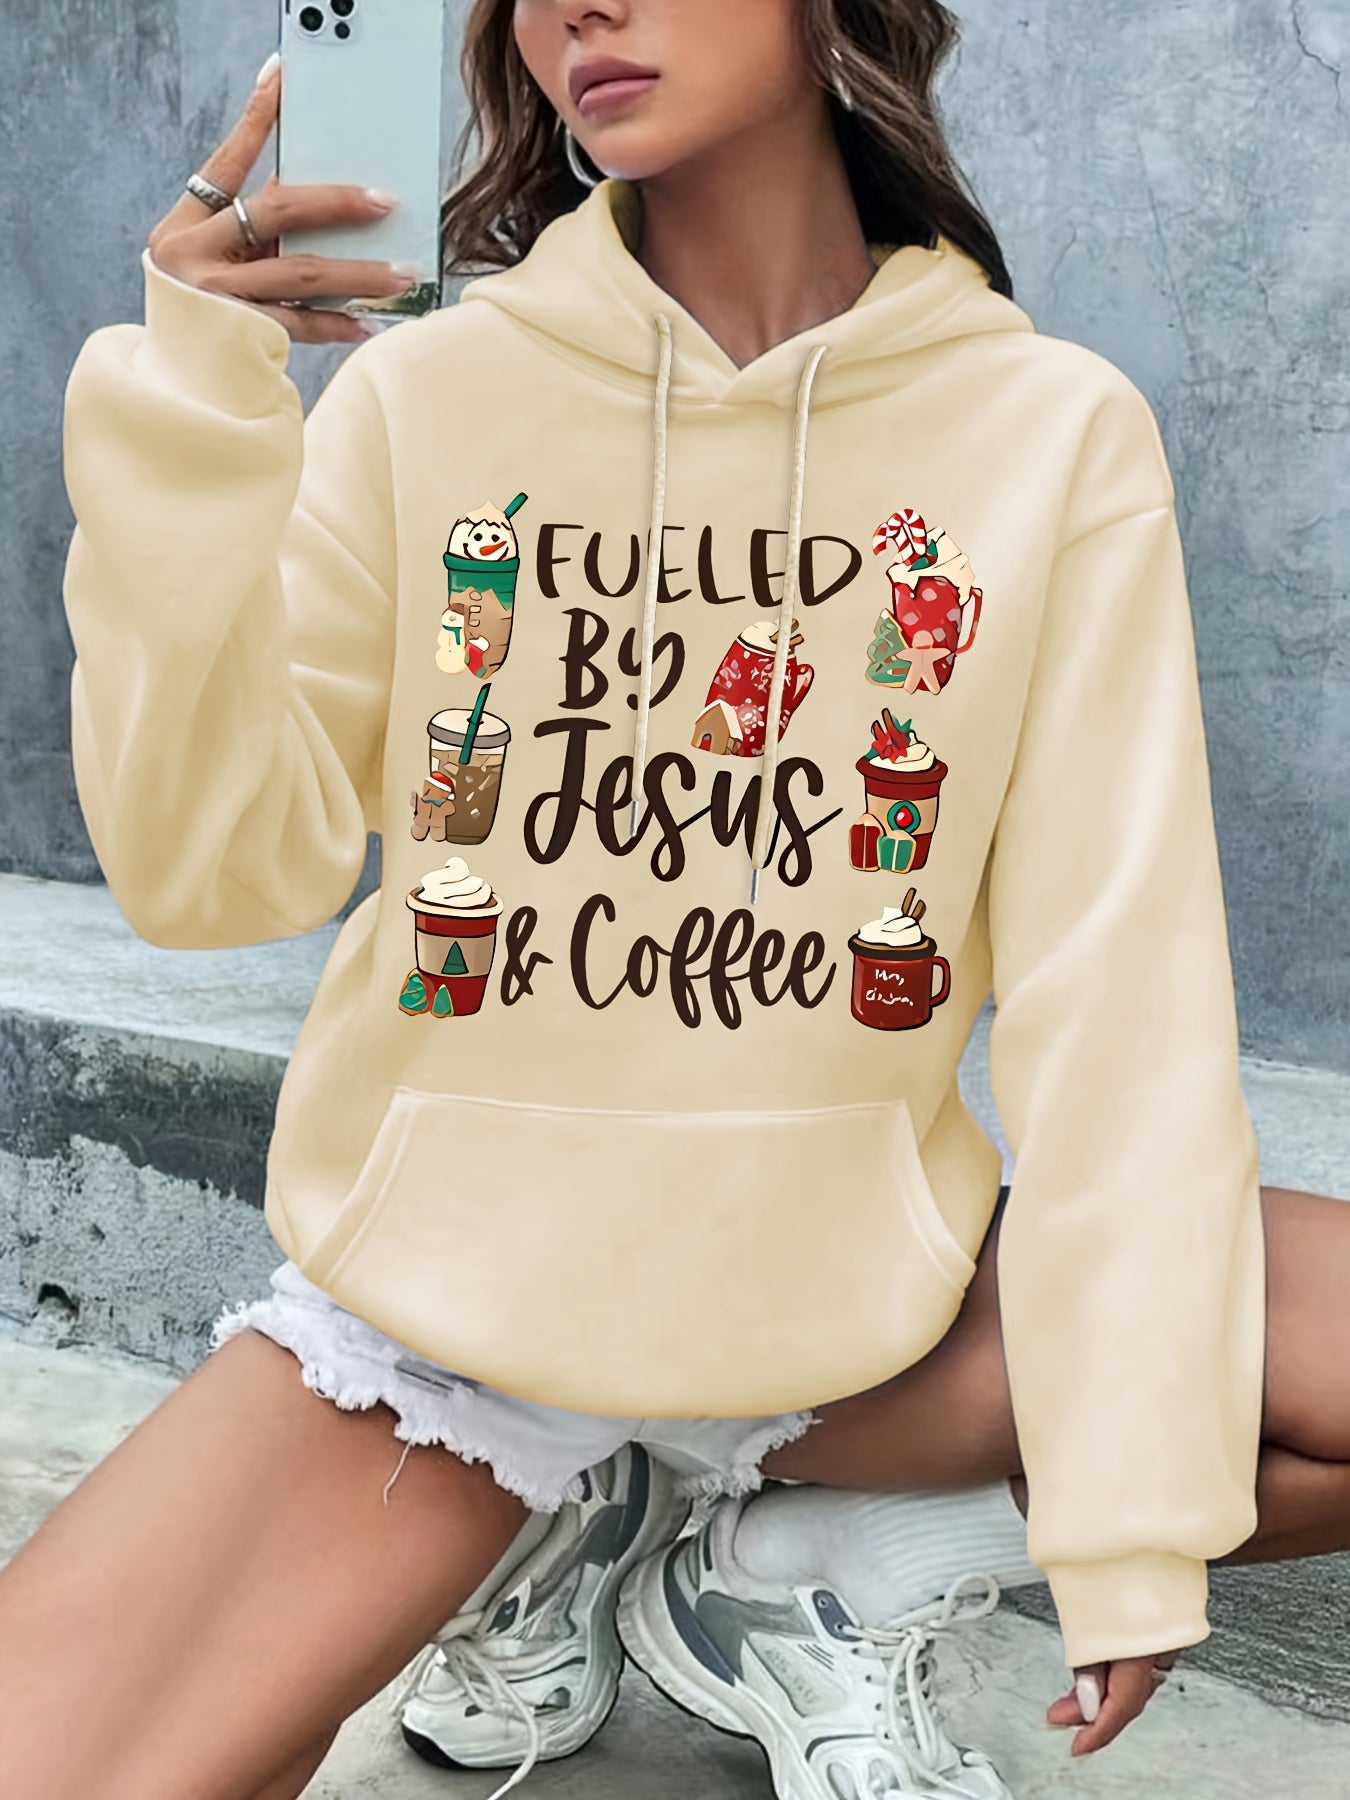 Fueled By Jesus & Coffee Women's Christian Pullover Hooded Sweatshirt claimedbygoddesigns